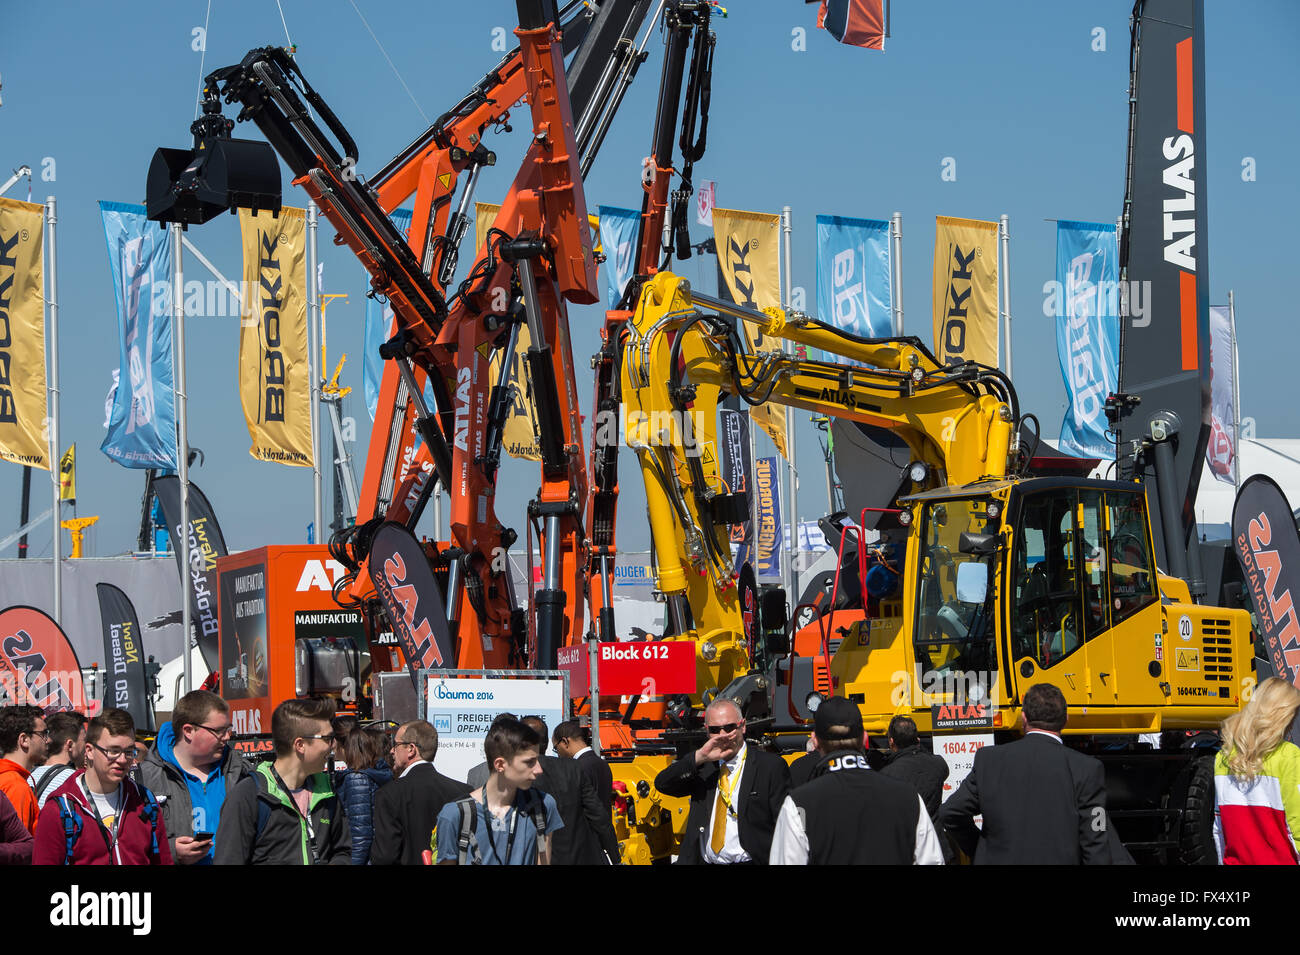 Munich, Germany. 11th Apr, 2016. Various construction vehicles pictured at the building fair Bauma in Munich, Germany, 11 April 2016. Photo: PETER KNEFFEL/dpa/Alamy Live News Stock Photo